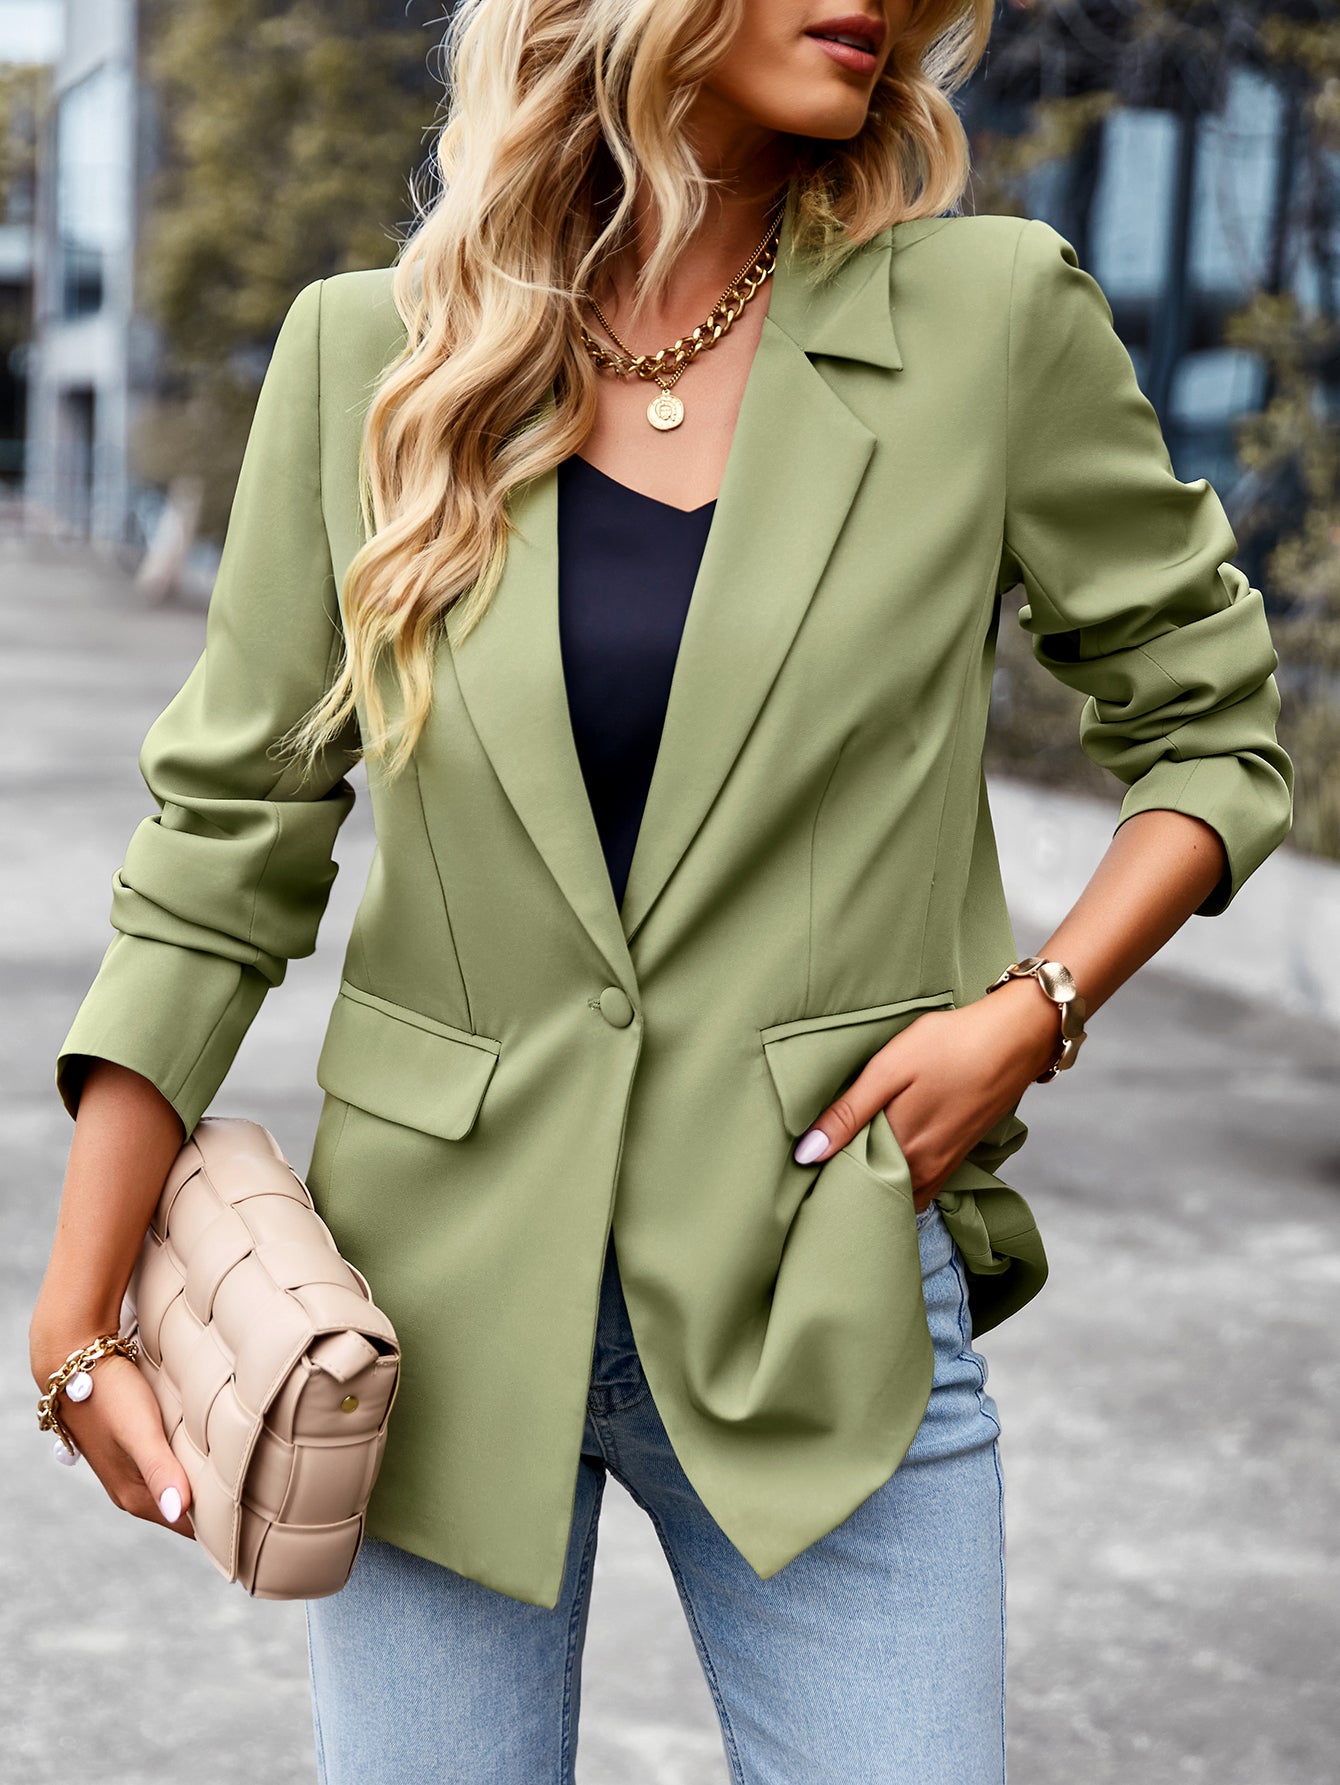 YESFASHION Self-developed And Designed American Station Casual Small Suit 2022 Winter All-match Jacket Professional Formal Women